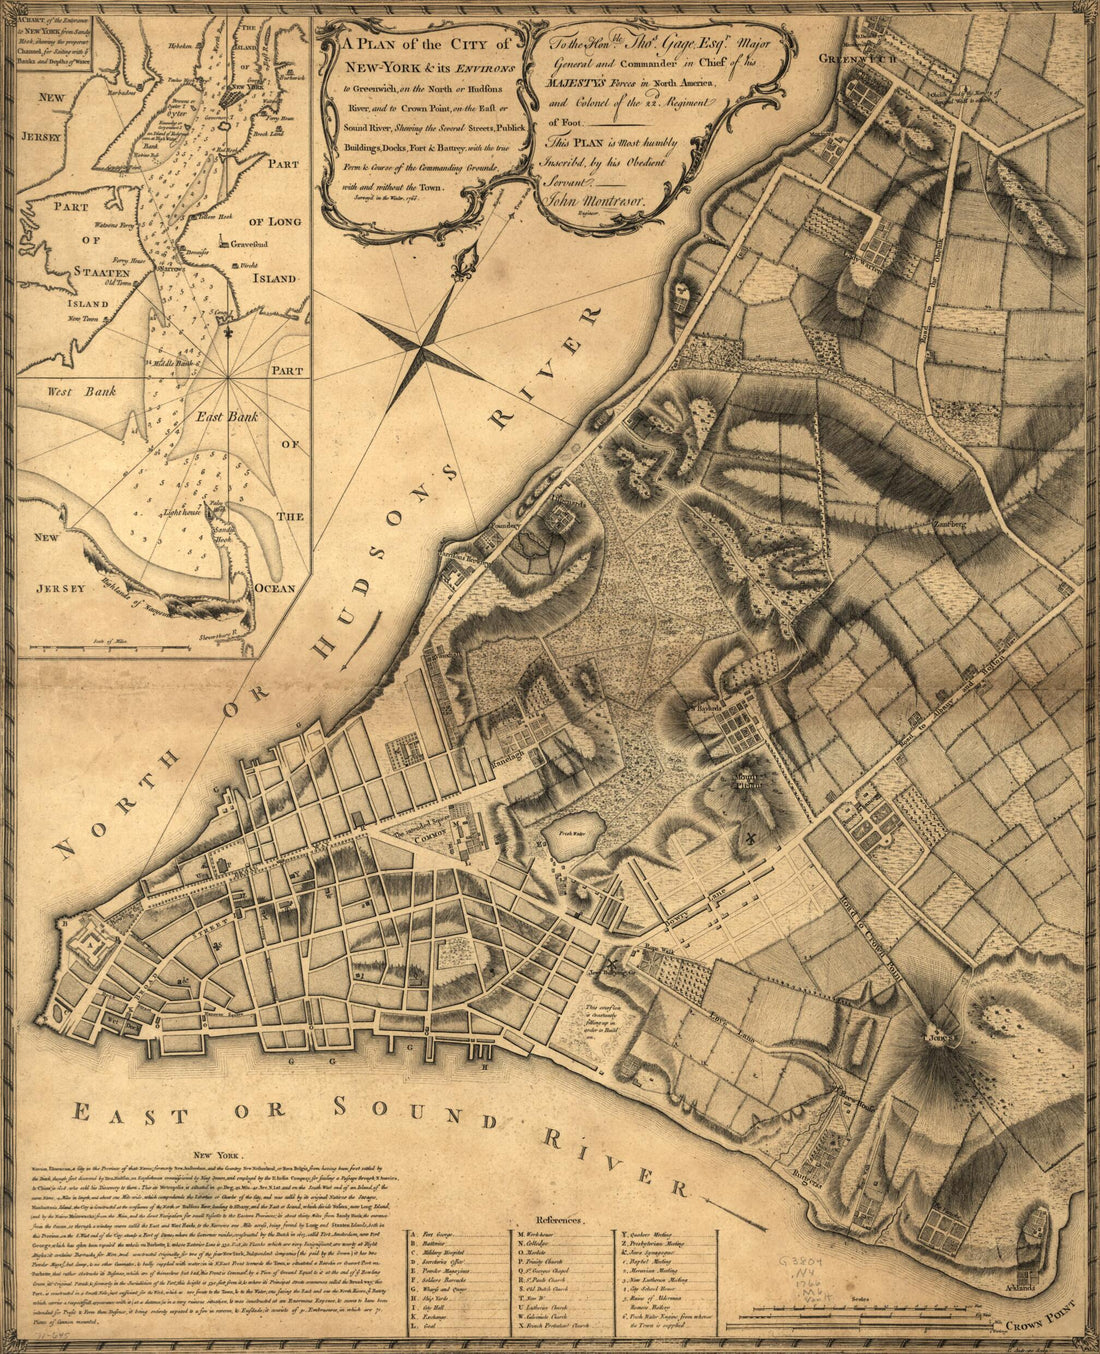 This old map of York &amp; Its Environs to Greenwich, On the North Or Hudsons River, and to Crown Point, On the East Or Sound River, Shewing the Several Streets, Publick Buildings, Docks, Fort &amp; Battery, With the True Form &amp; Course of the Commanding Grounds,